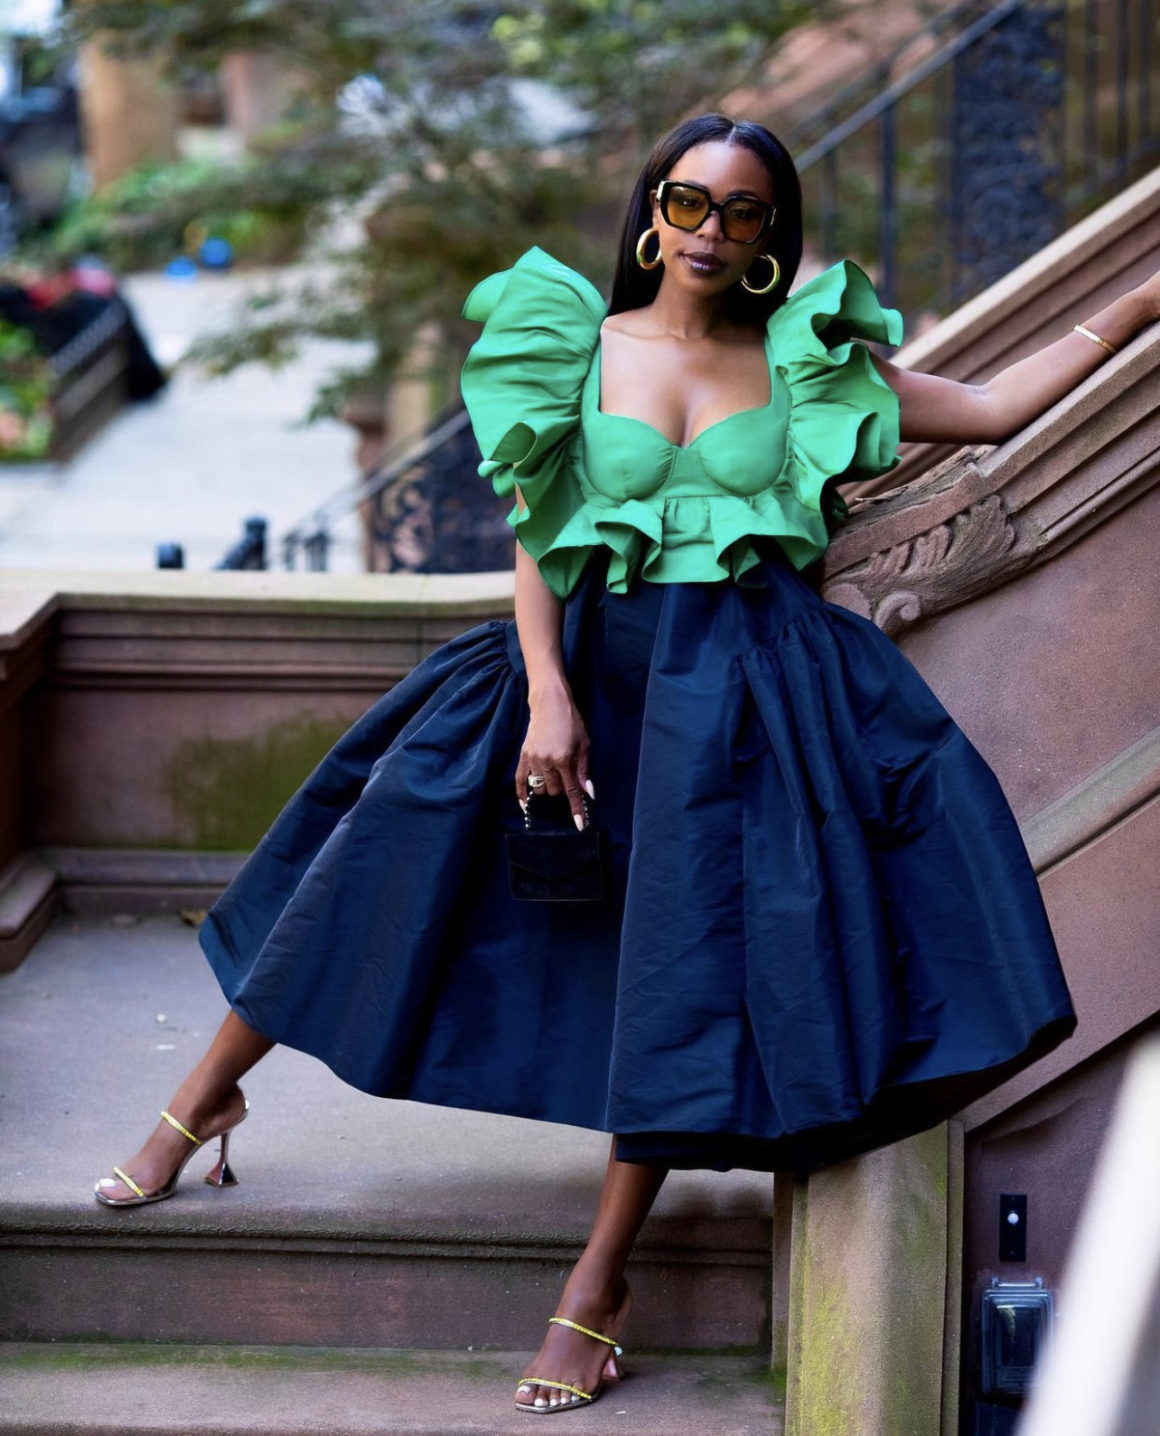 2021 Fabys Awards Vote For Fashion Bombshell of The Year Featuring Zamar Lewis from New York Arraya from Florida Kahlana Barfield Brown and More